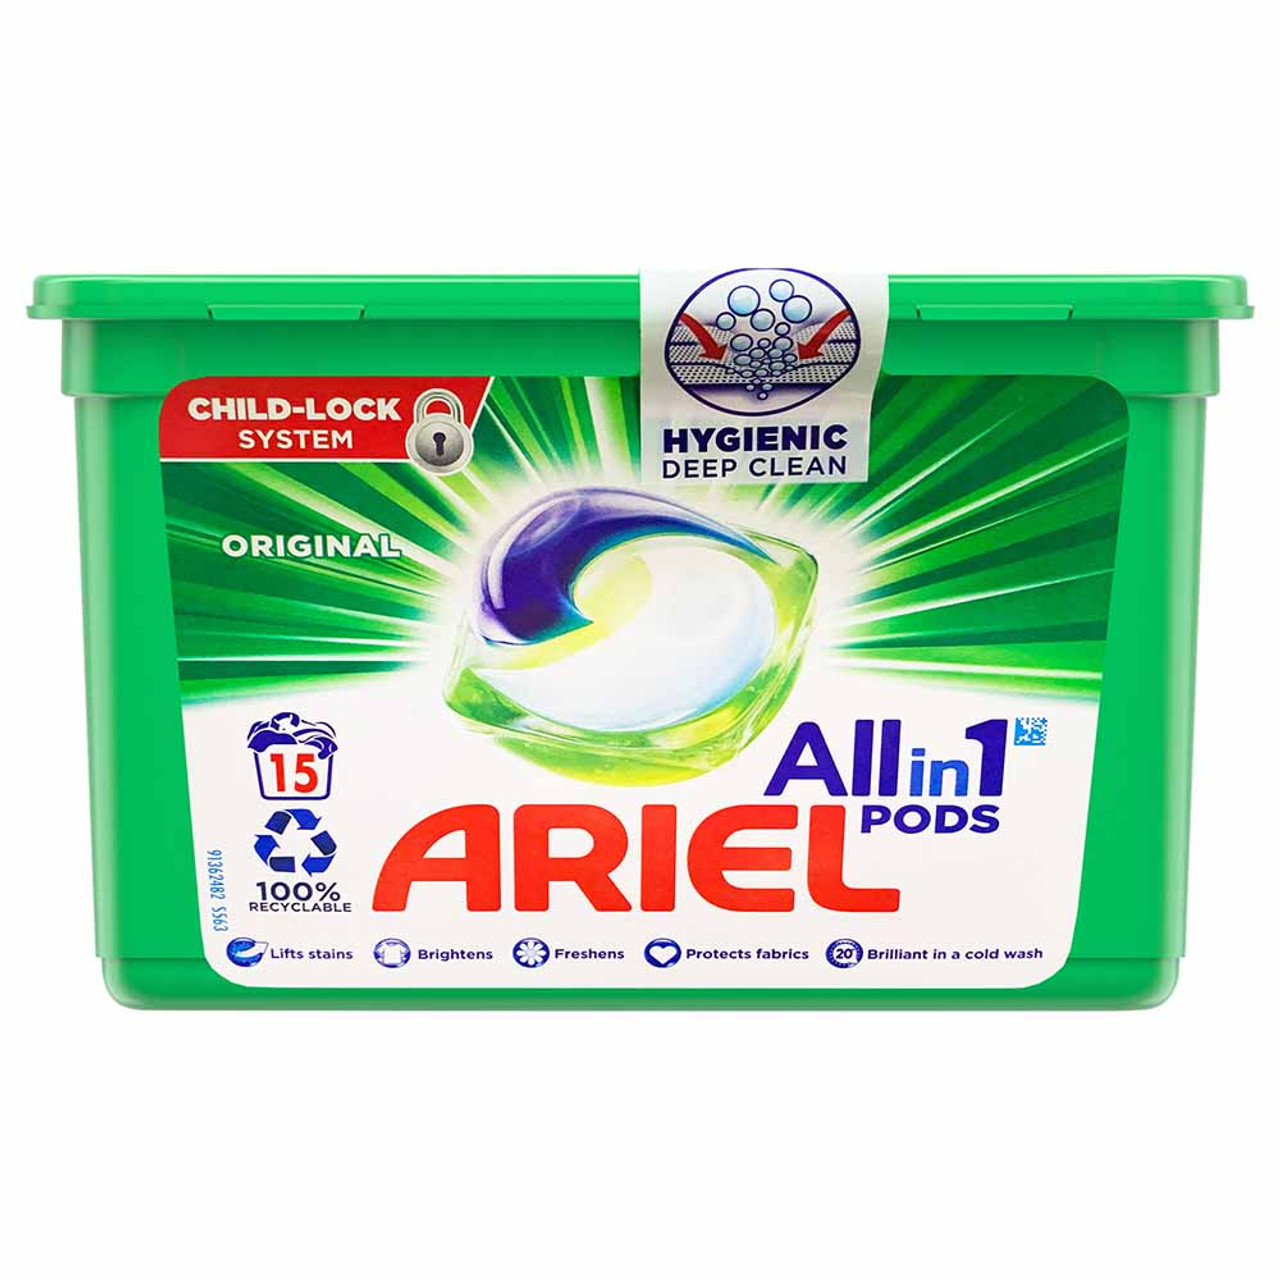 Ariel Original All in 1 Pods 3x15 - Nomm Company Limited